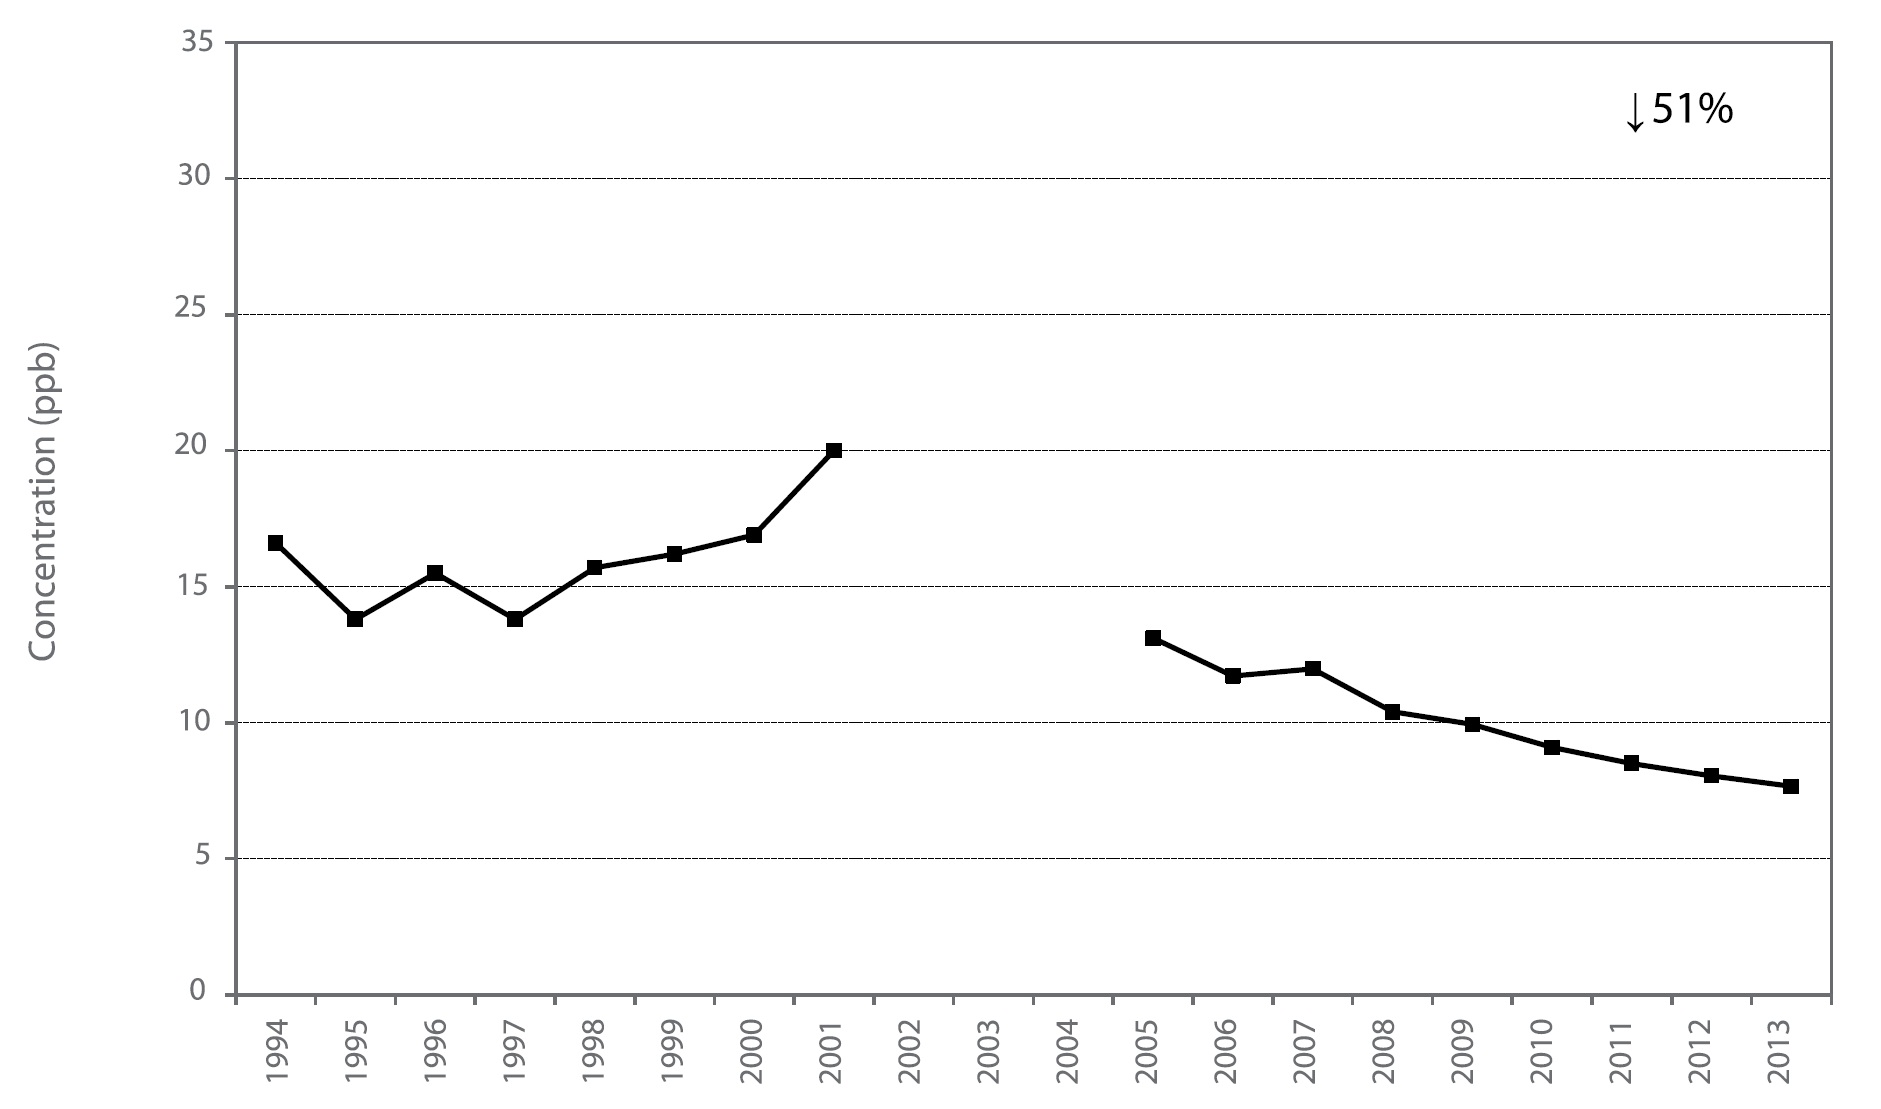 Figure A31 is a line chart displaying the nitrogen dioxide annual mean at St. Catharines from 1994 to 2013. Over this 20-year period, nitrogen dioxide decreased 51%.